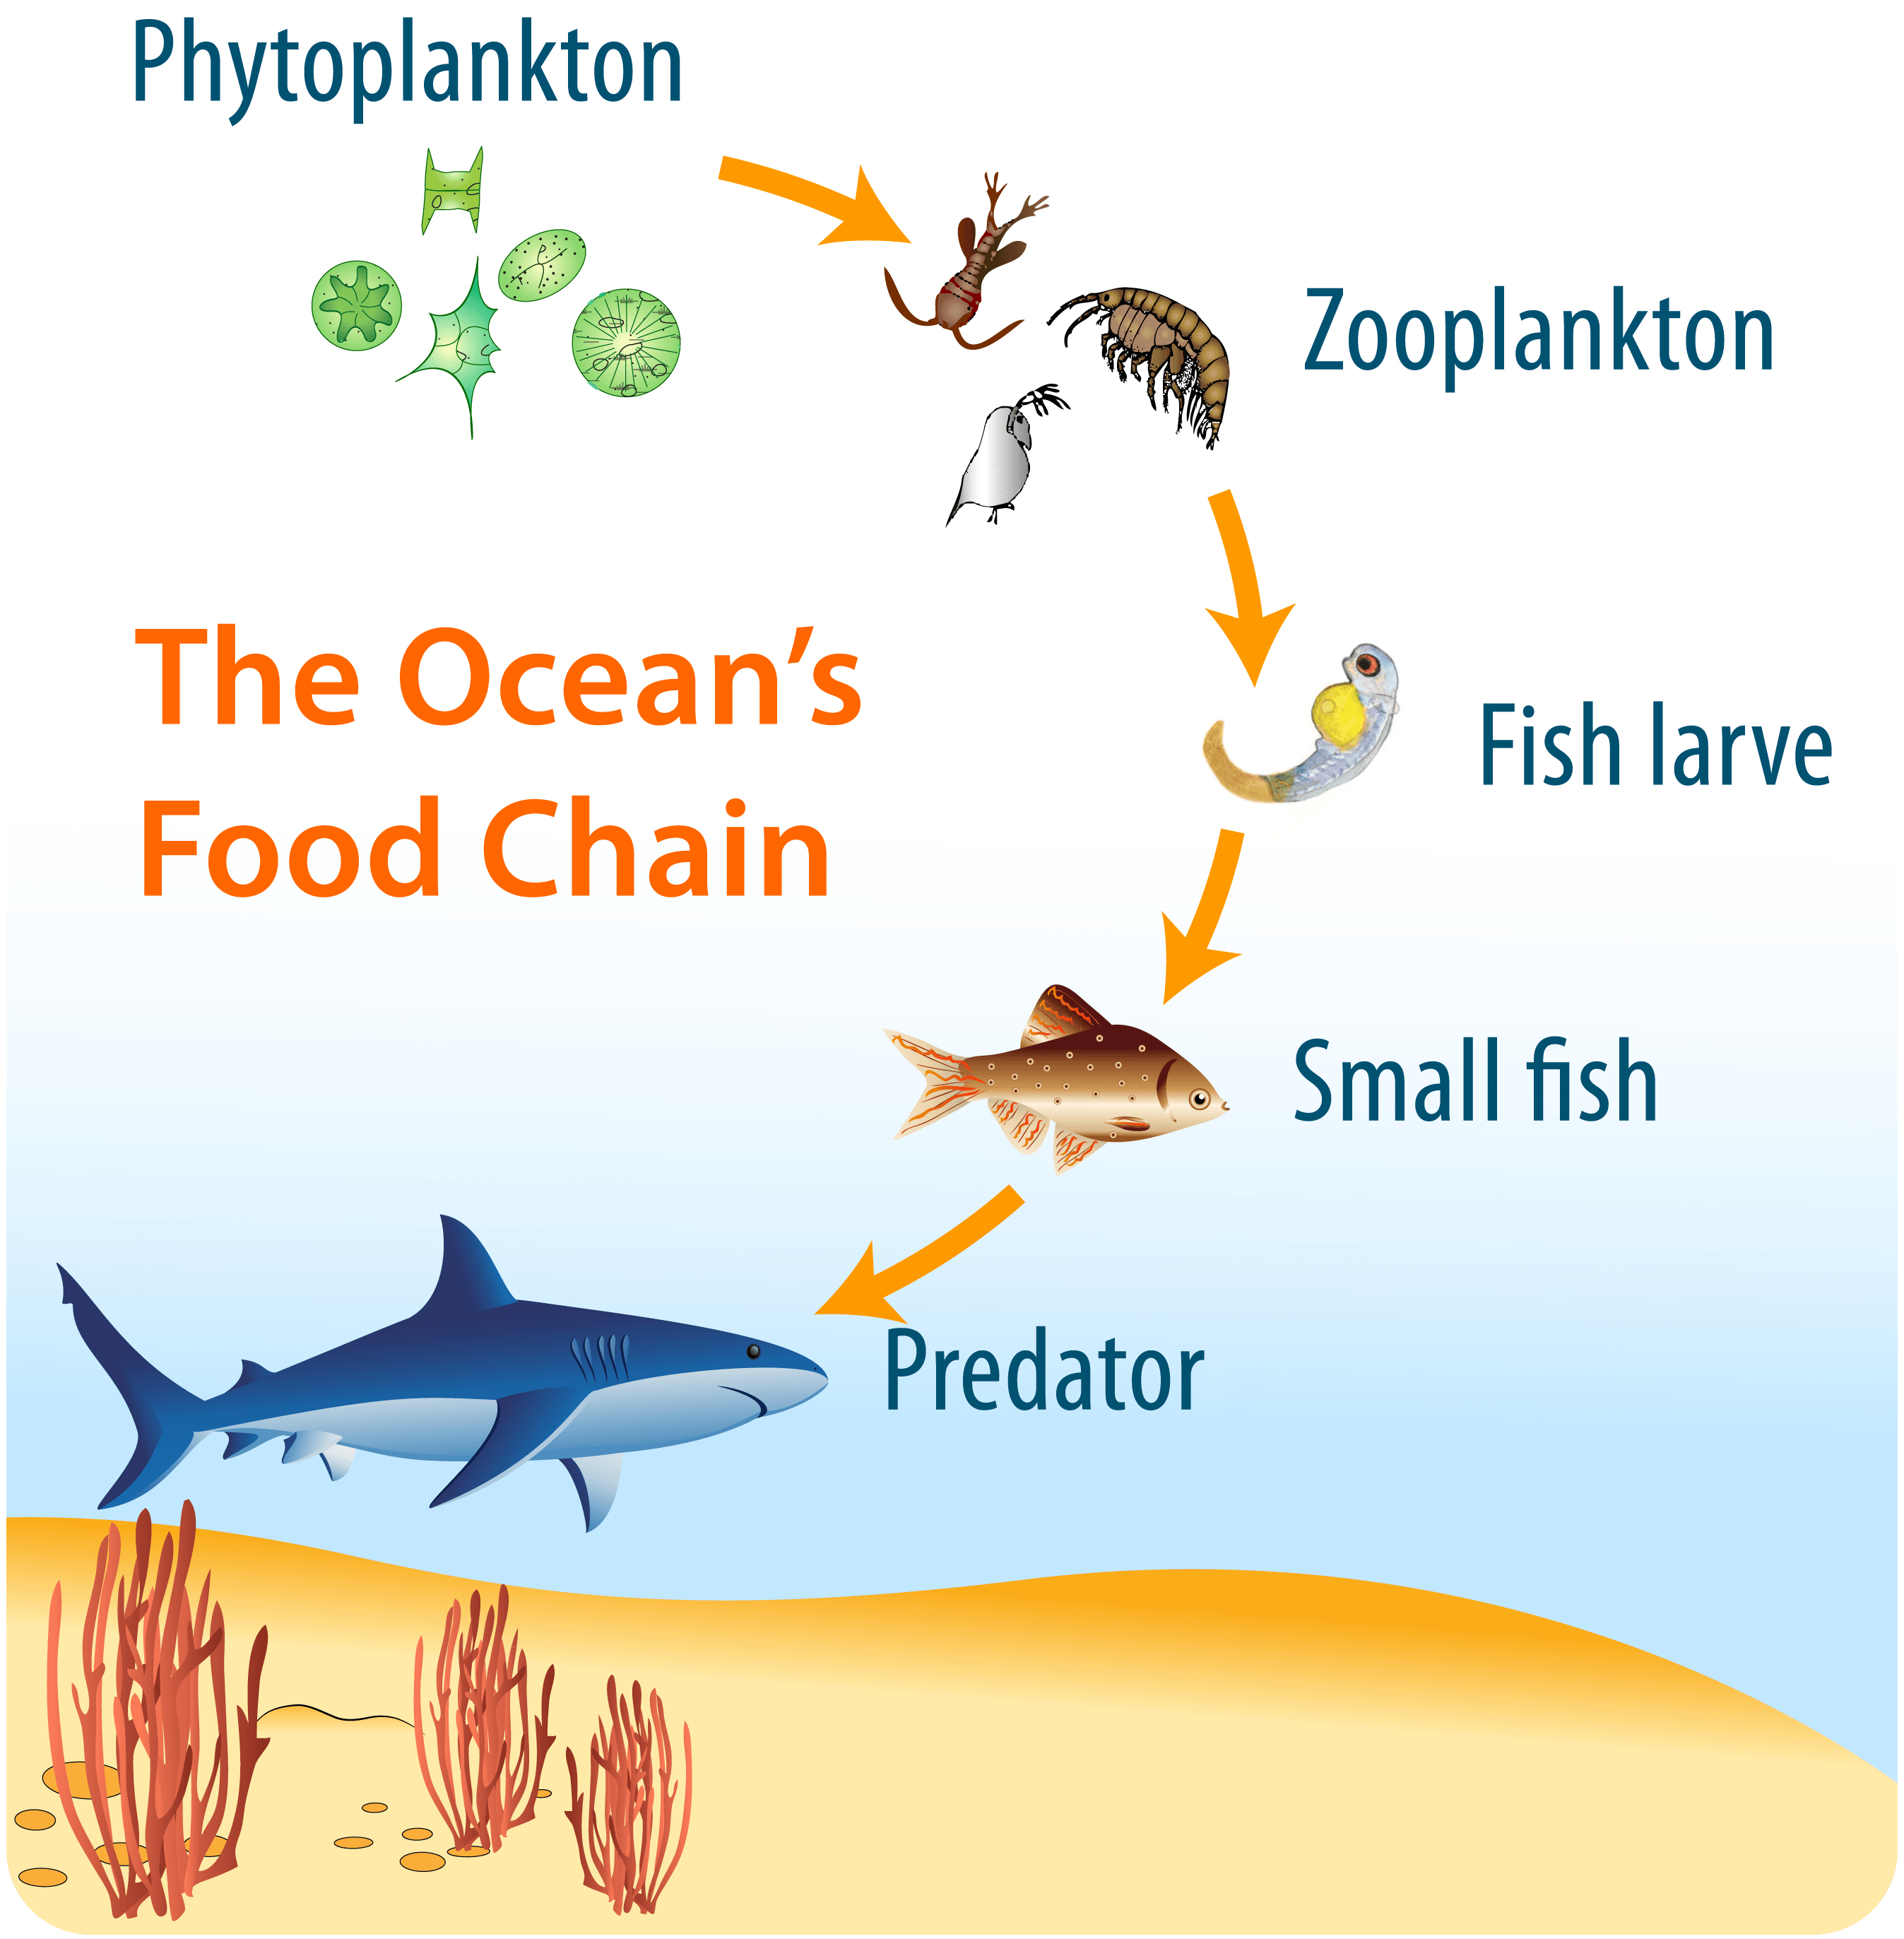 phytoplankton in the oceanic food chain Image. Food chain